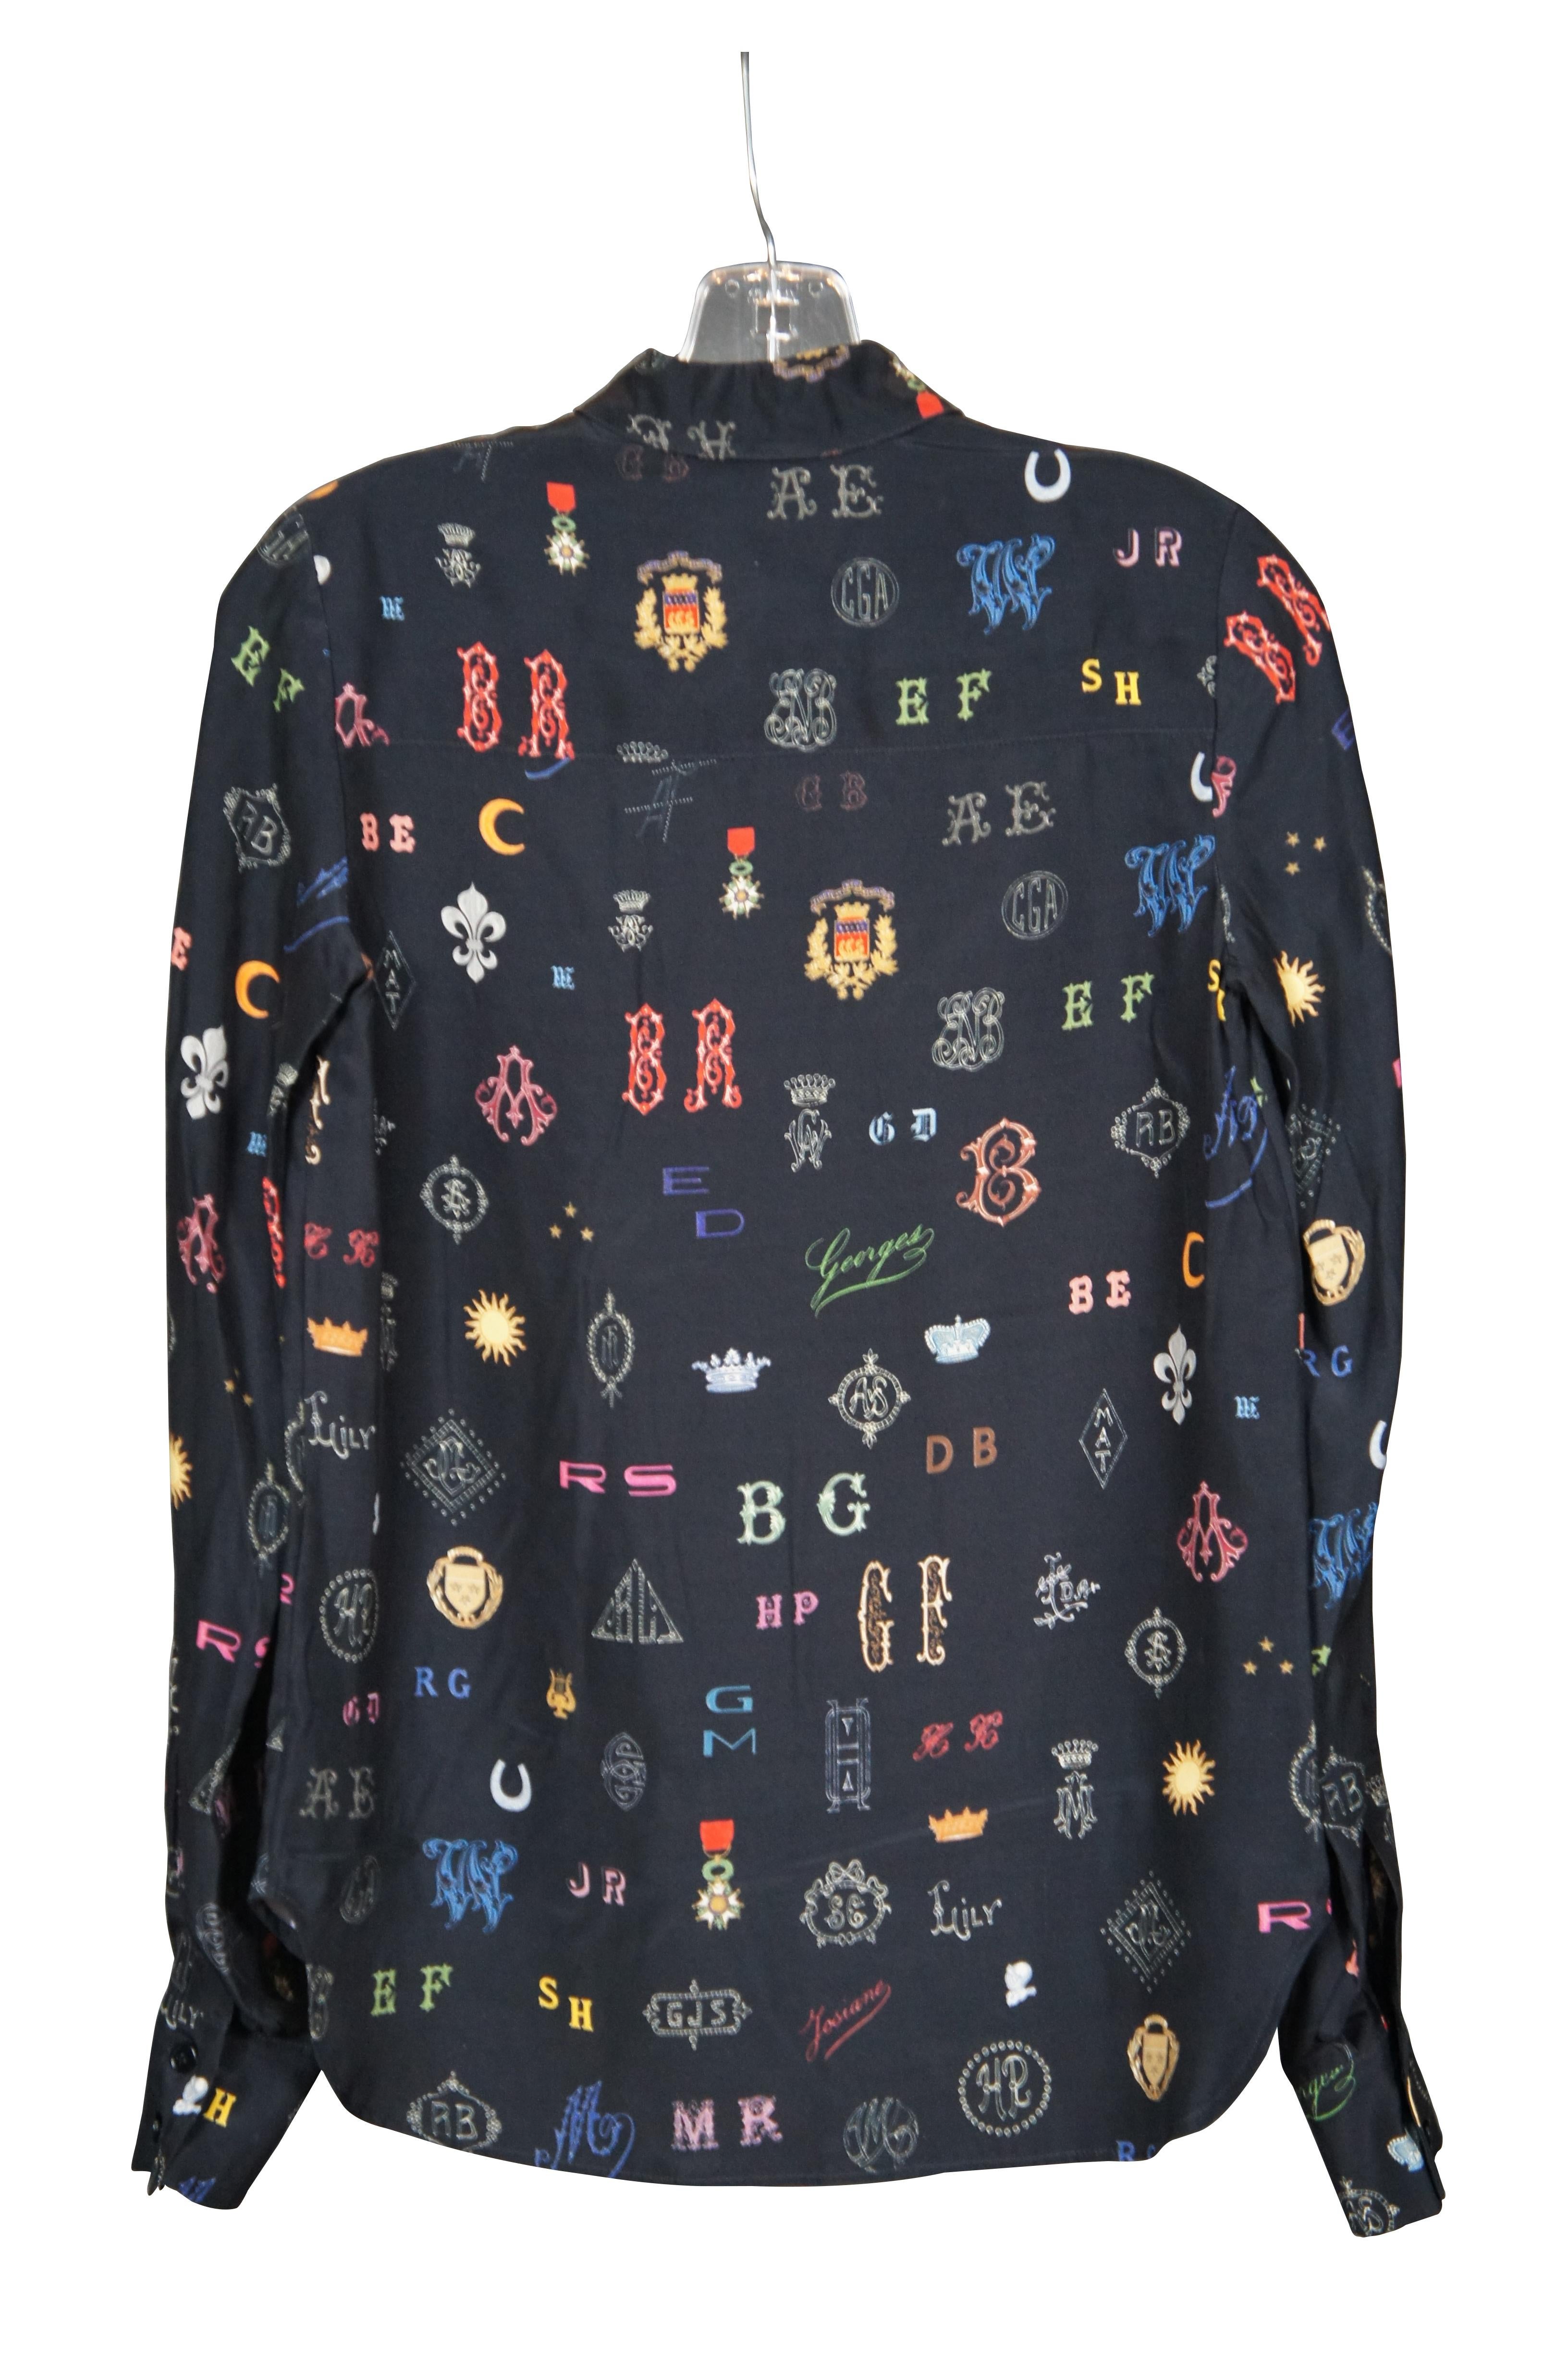 Vintage Stella McCartney 100% silk button up monogram logo shirt / long sleeve blouse with printed pattern on black ground and hem slightly longer in the back then the front. Made in Hungary.

Size 2 / Shoulders – 16” / Arm Length – 24.5” / Chest